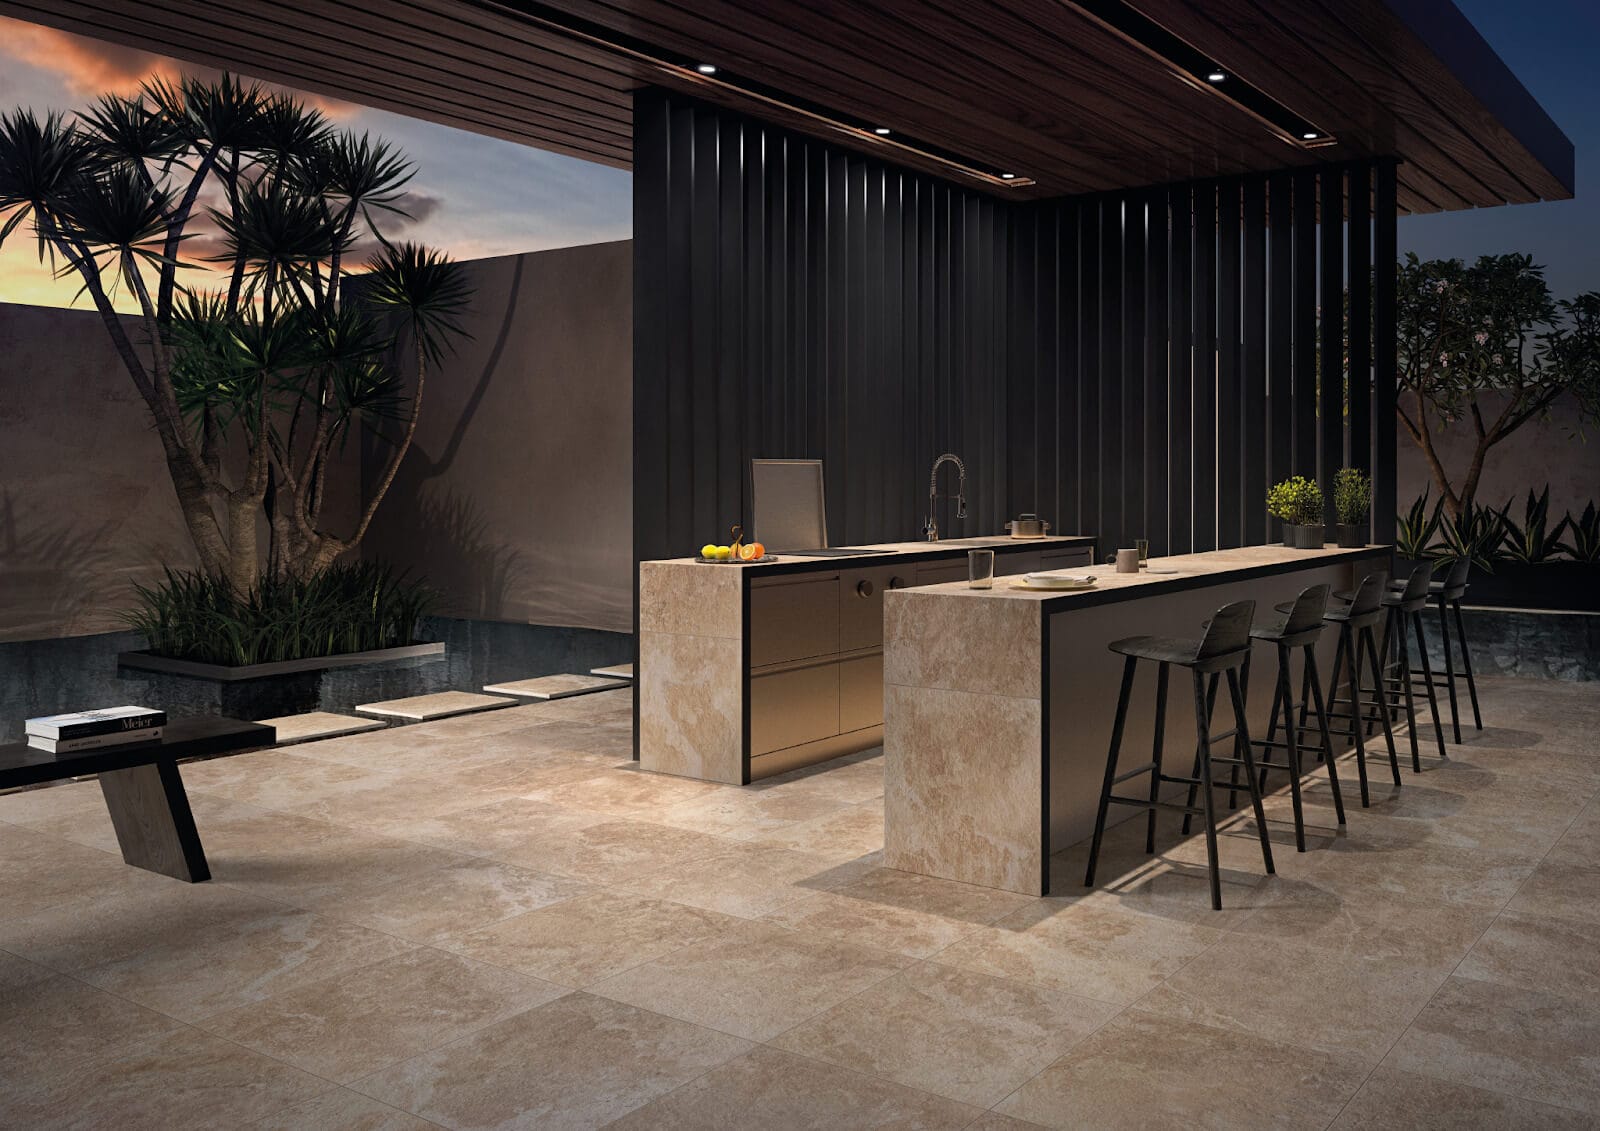 Stone-look tile flooring and countertops in an outdoor kitchen